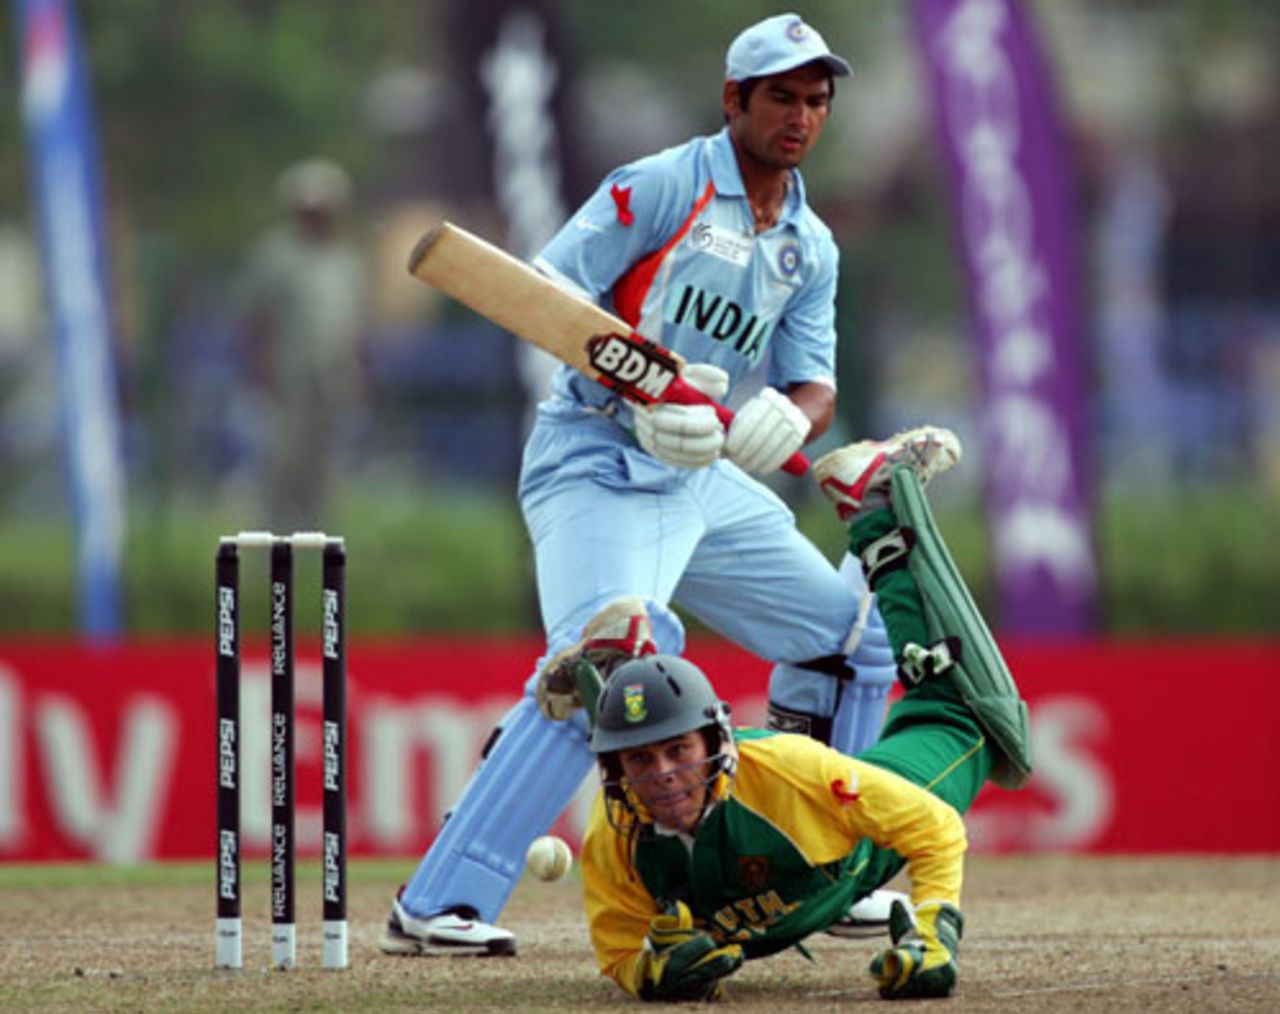 Bradley Barnes makes an athletic attempt to catch the ball, India v South Africa, Under-19 World Cup final, Kuala Lumpur, March 2, 2008 
